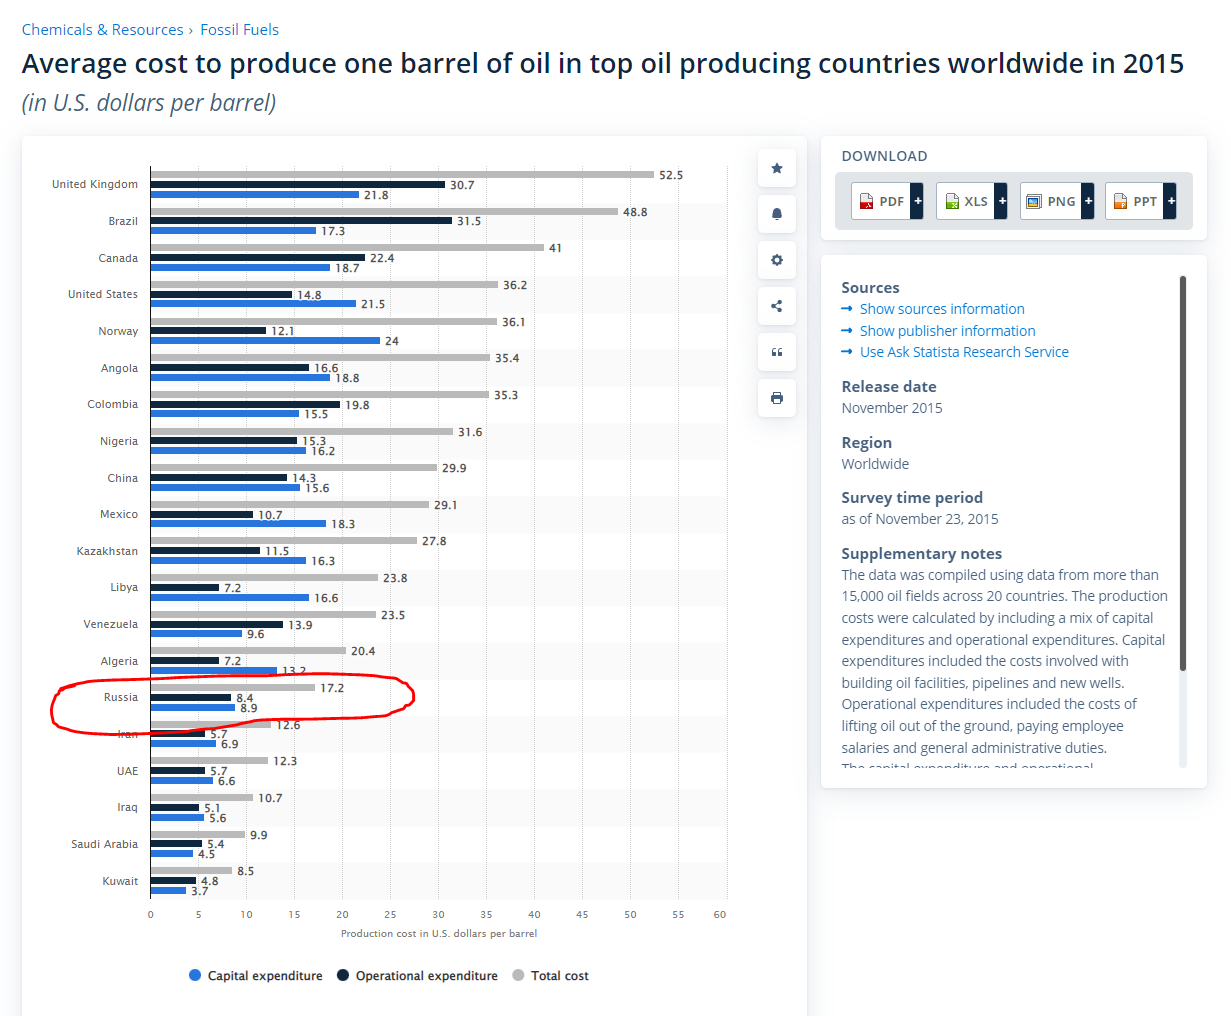 15 - average cost to produce oil barrel - Rus circled.PNG